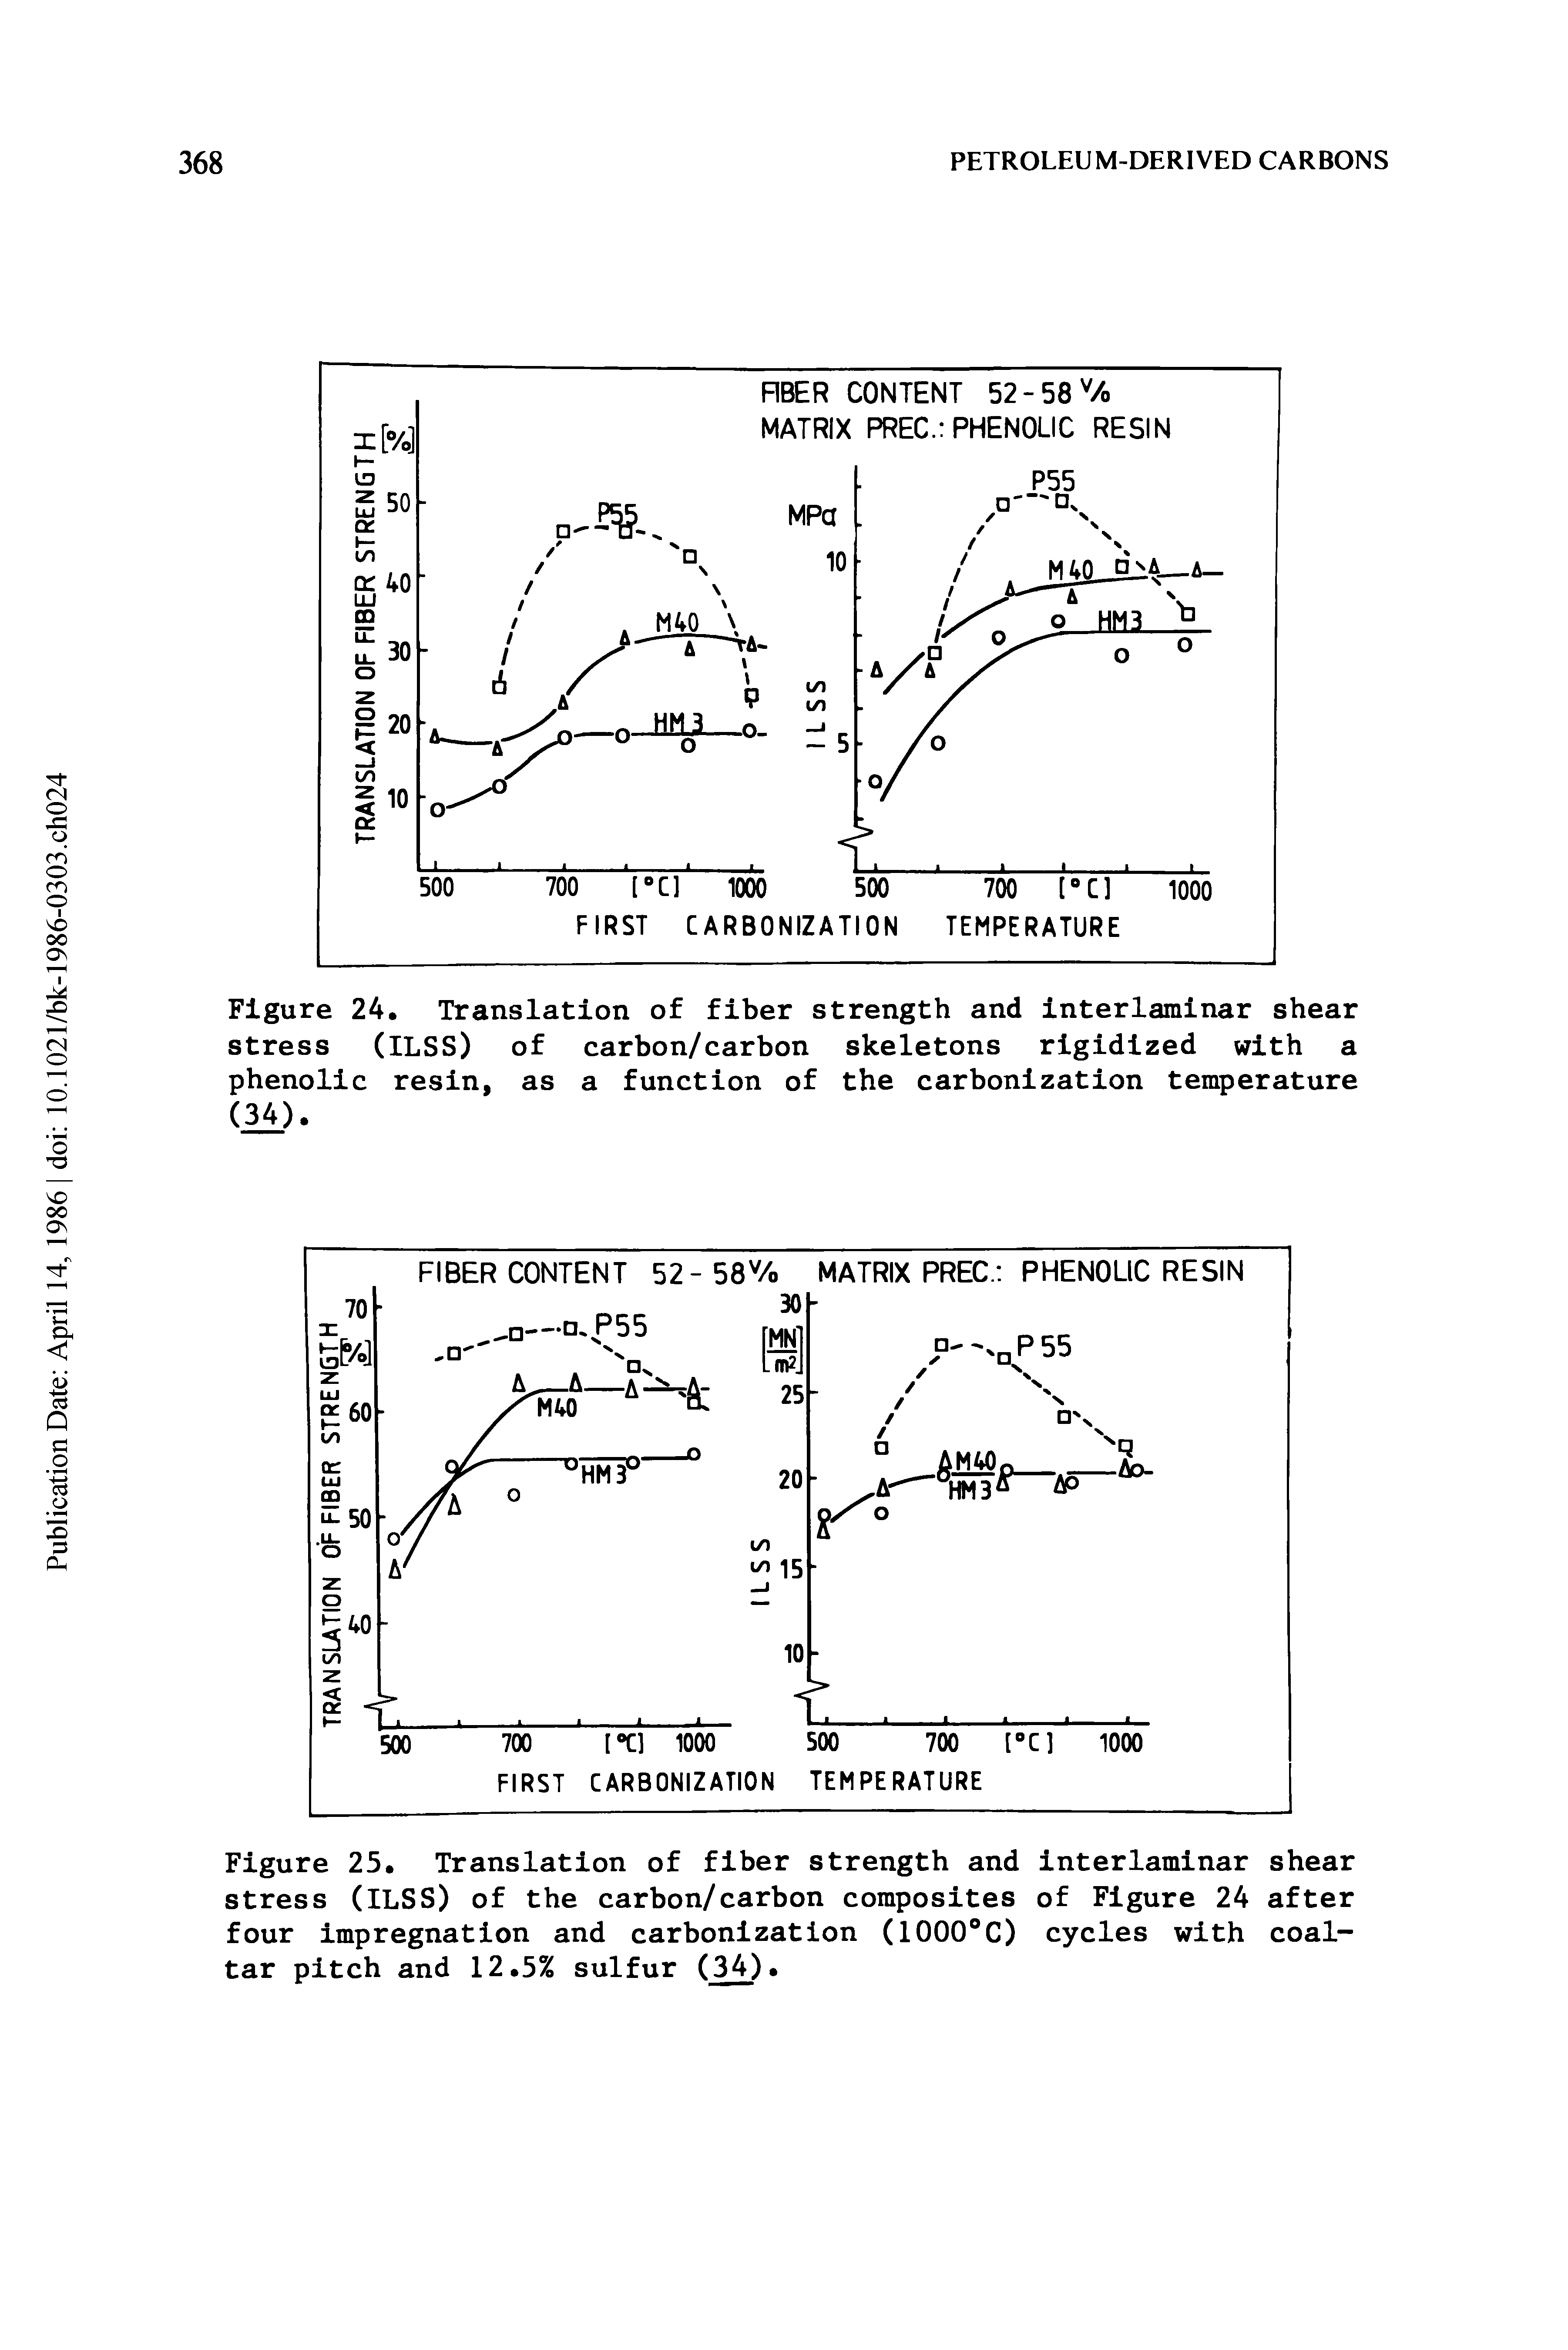 Figure 25. Translation of fiber strength and interlaminar shear stress (ILSS) of the carbon/carbon composites of Figure 24 after four impregnation and carbonization (1000°C) cycles with coal-tar pitch and 12.5% sulfur (34).